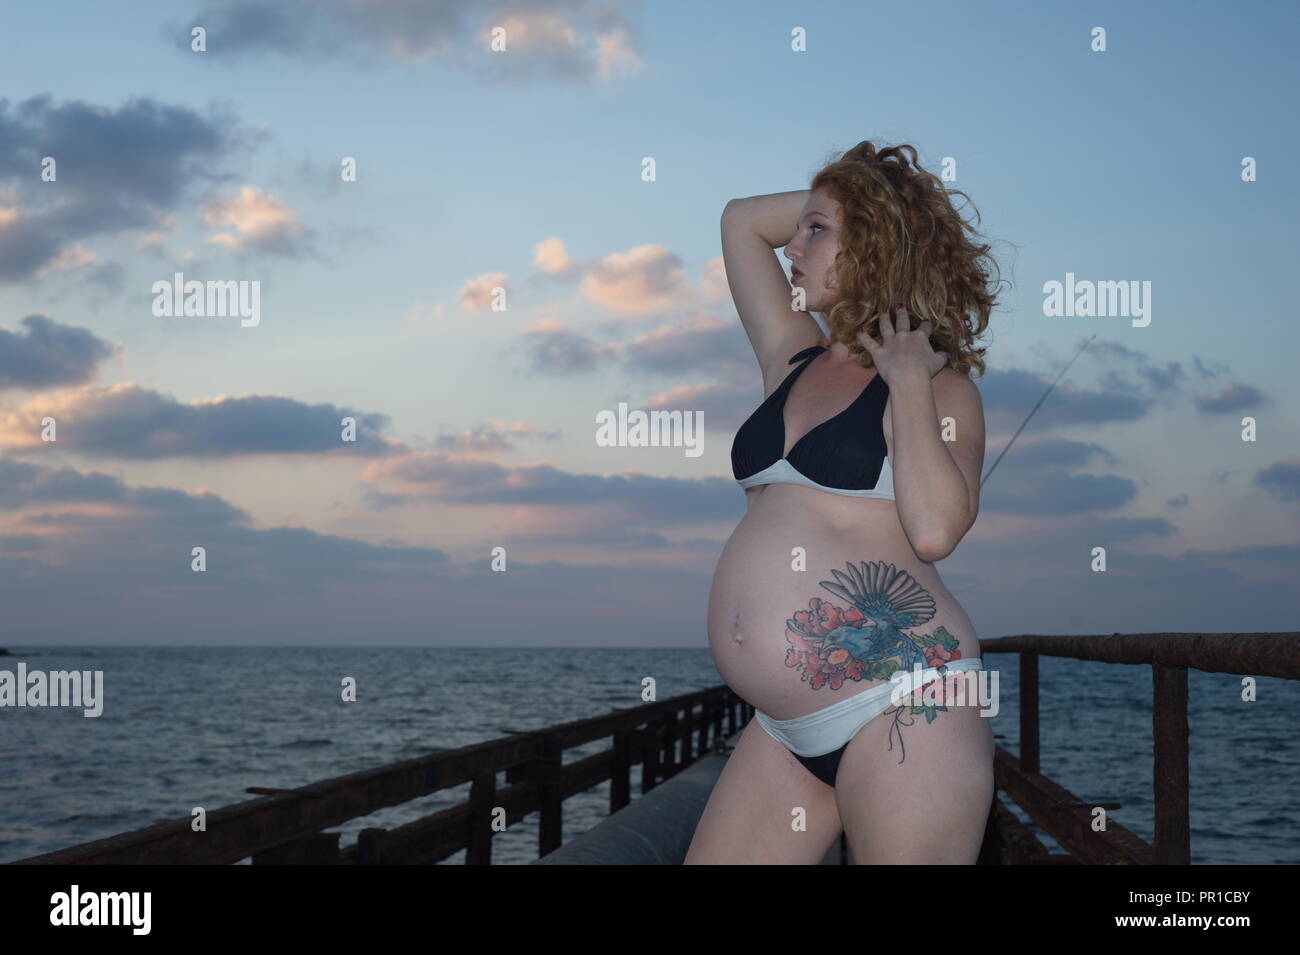 amazing pregnancy woman with tattooing, in coast sea Stock Photo